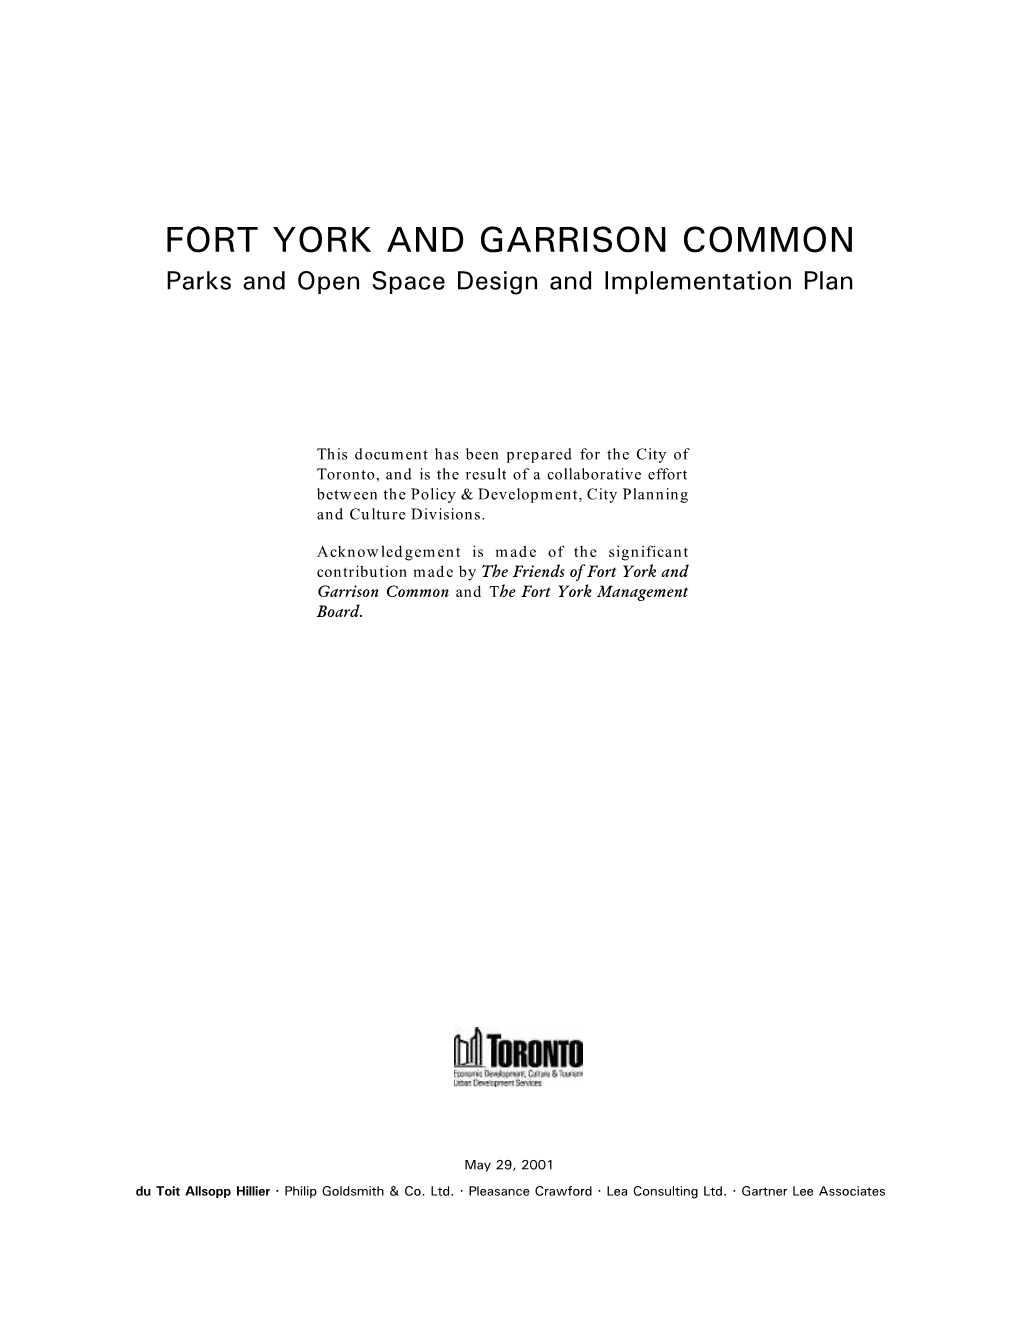 FORT YORK and GARRISON COMMON Parks and Open Space Design and Implementation Plan